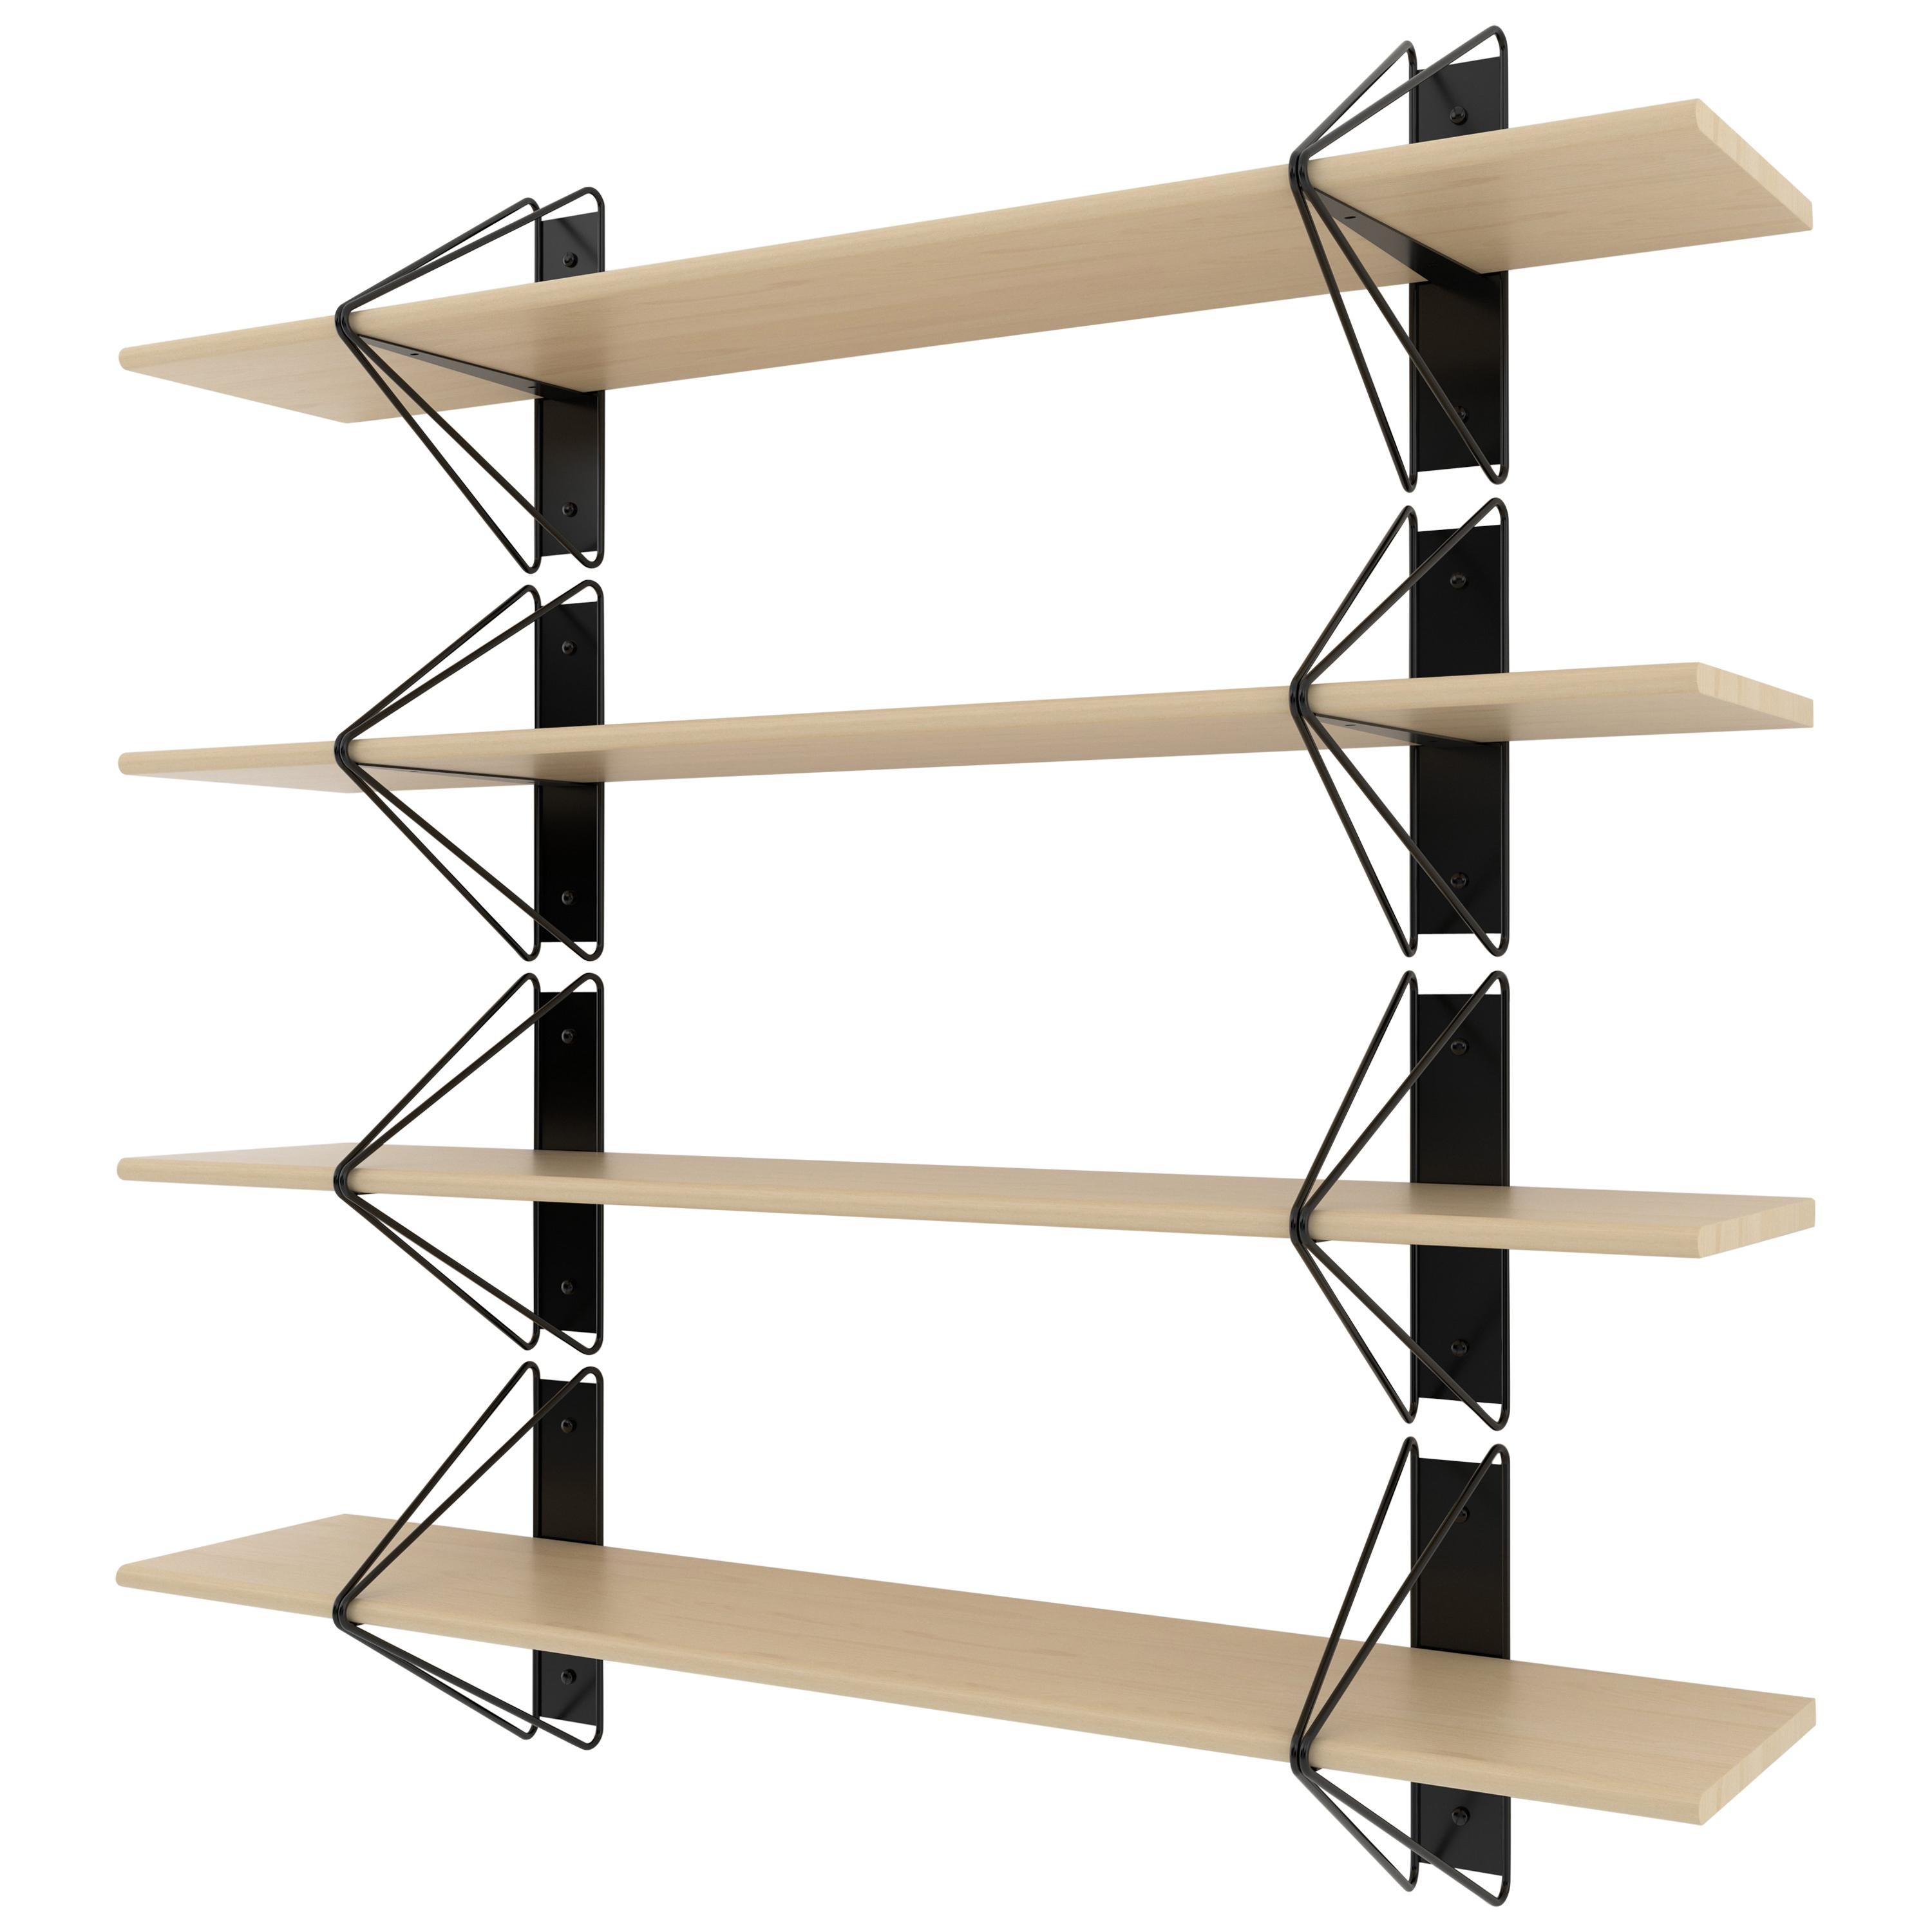 American Set of 5 Strut Shelves from Souda, 116in, Black and Walnut, Made to Order For Sale